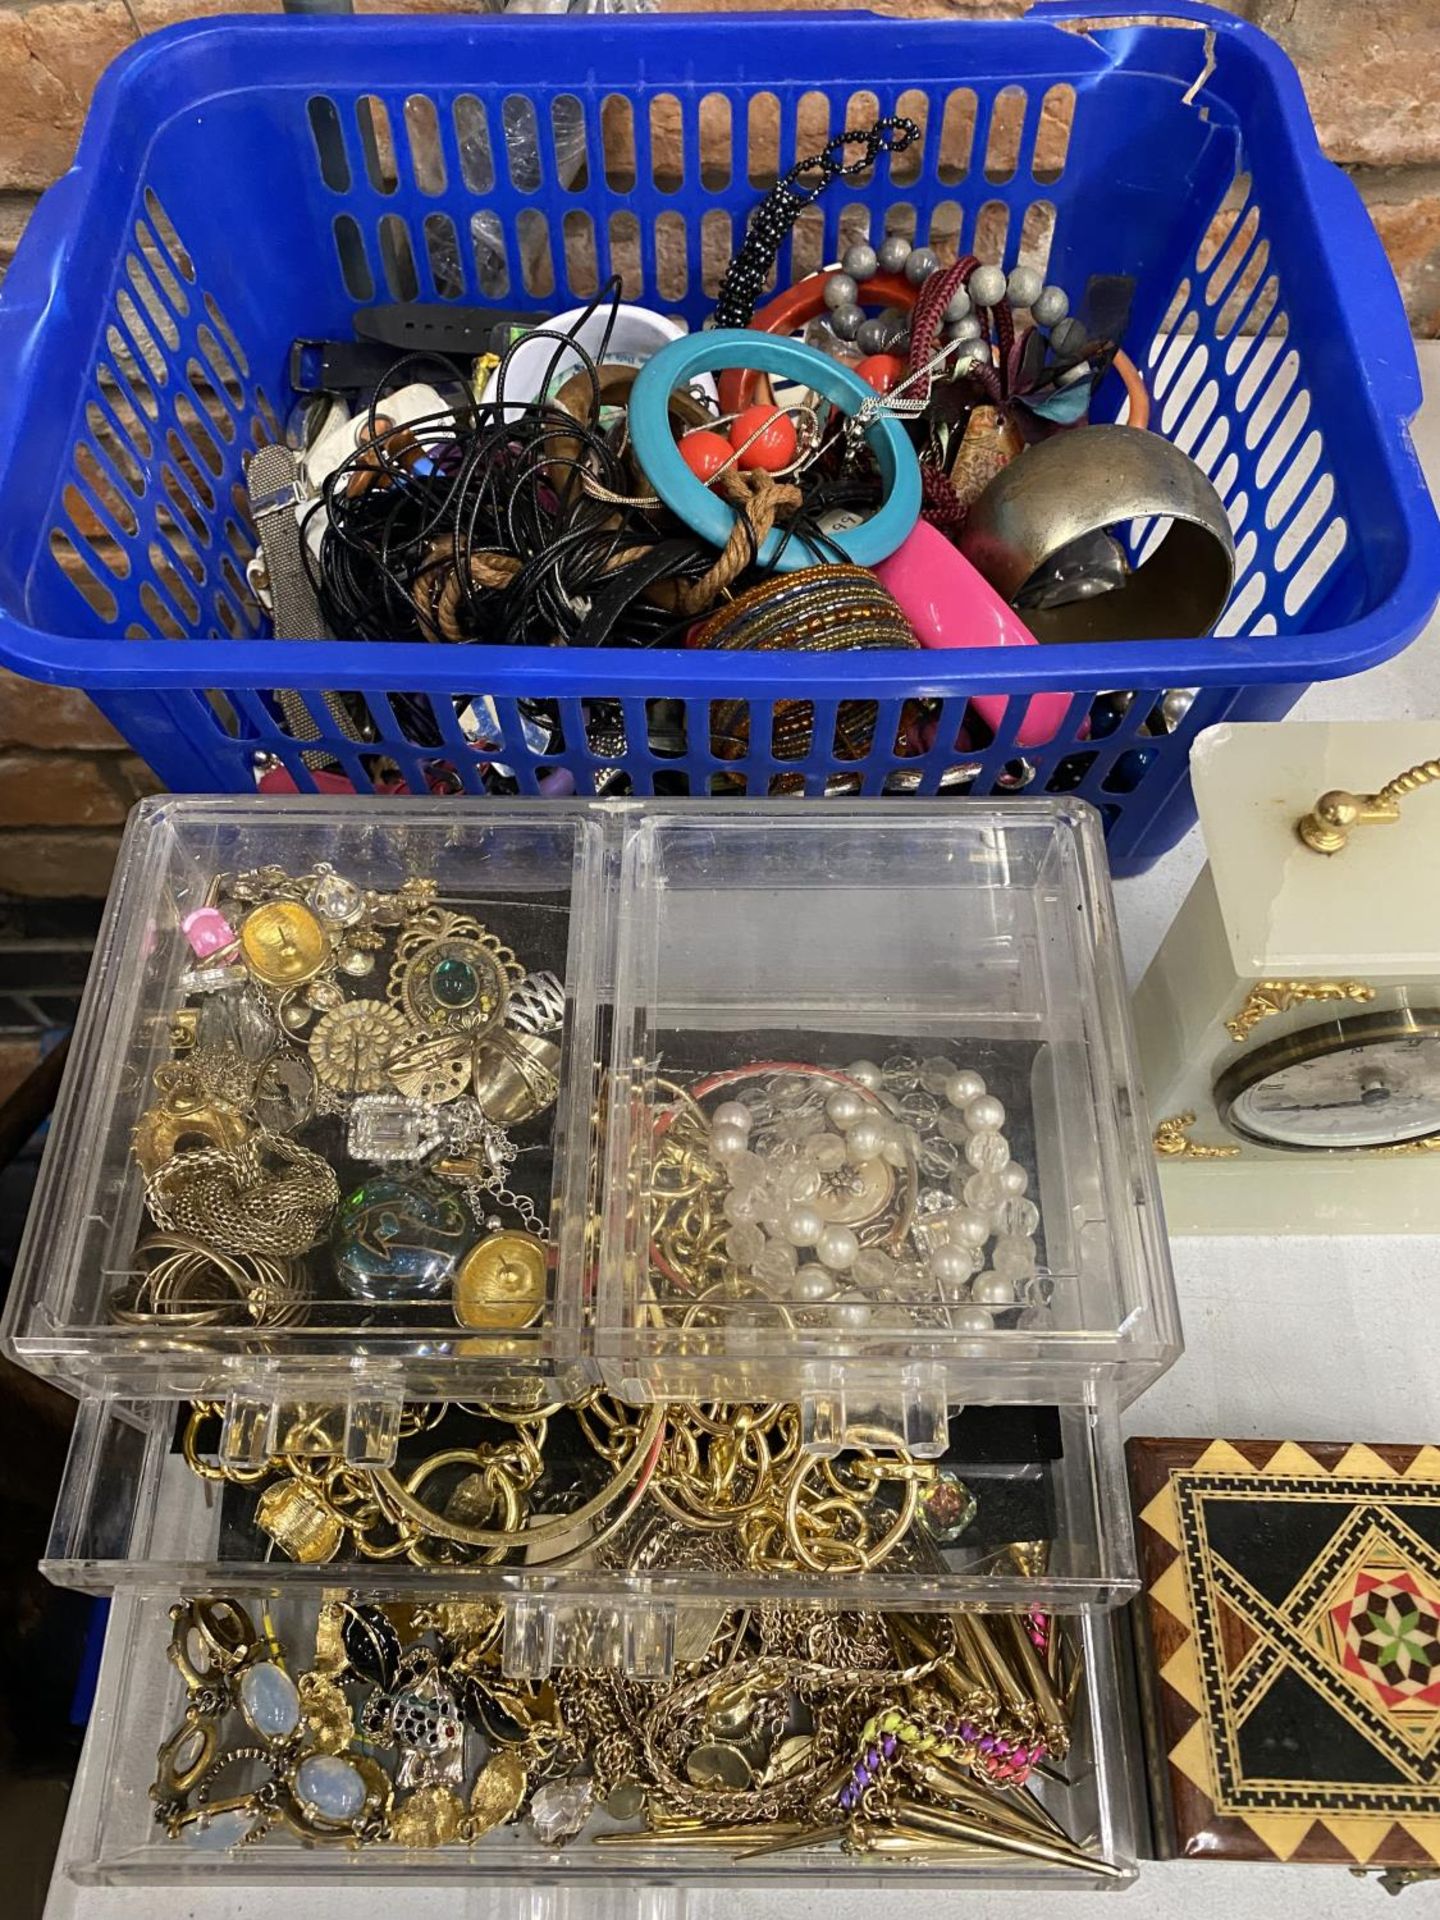 A QUANTITY OF COSTUME JEWELLERY INCLUDING NECKLACES, RINGS, BANGLES, BEADS, WATCHES, ETC - Image 2 of 3